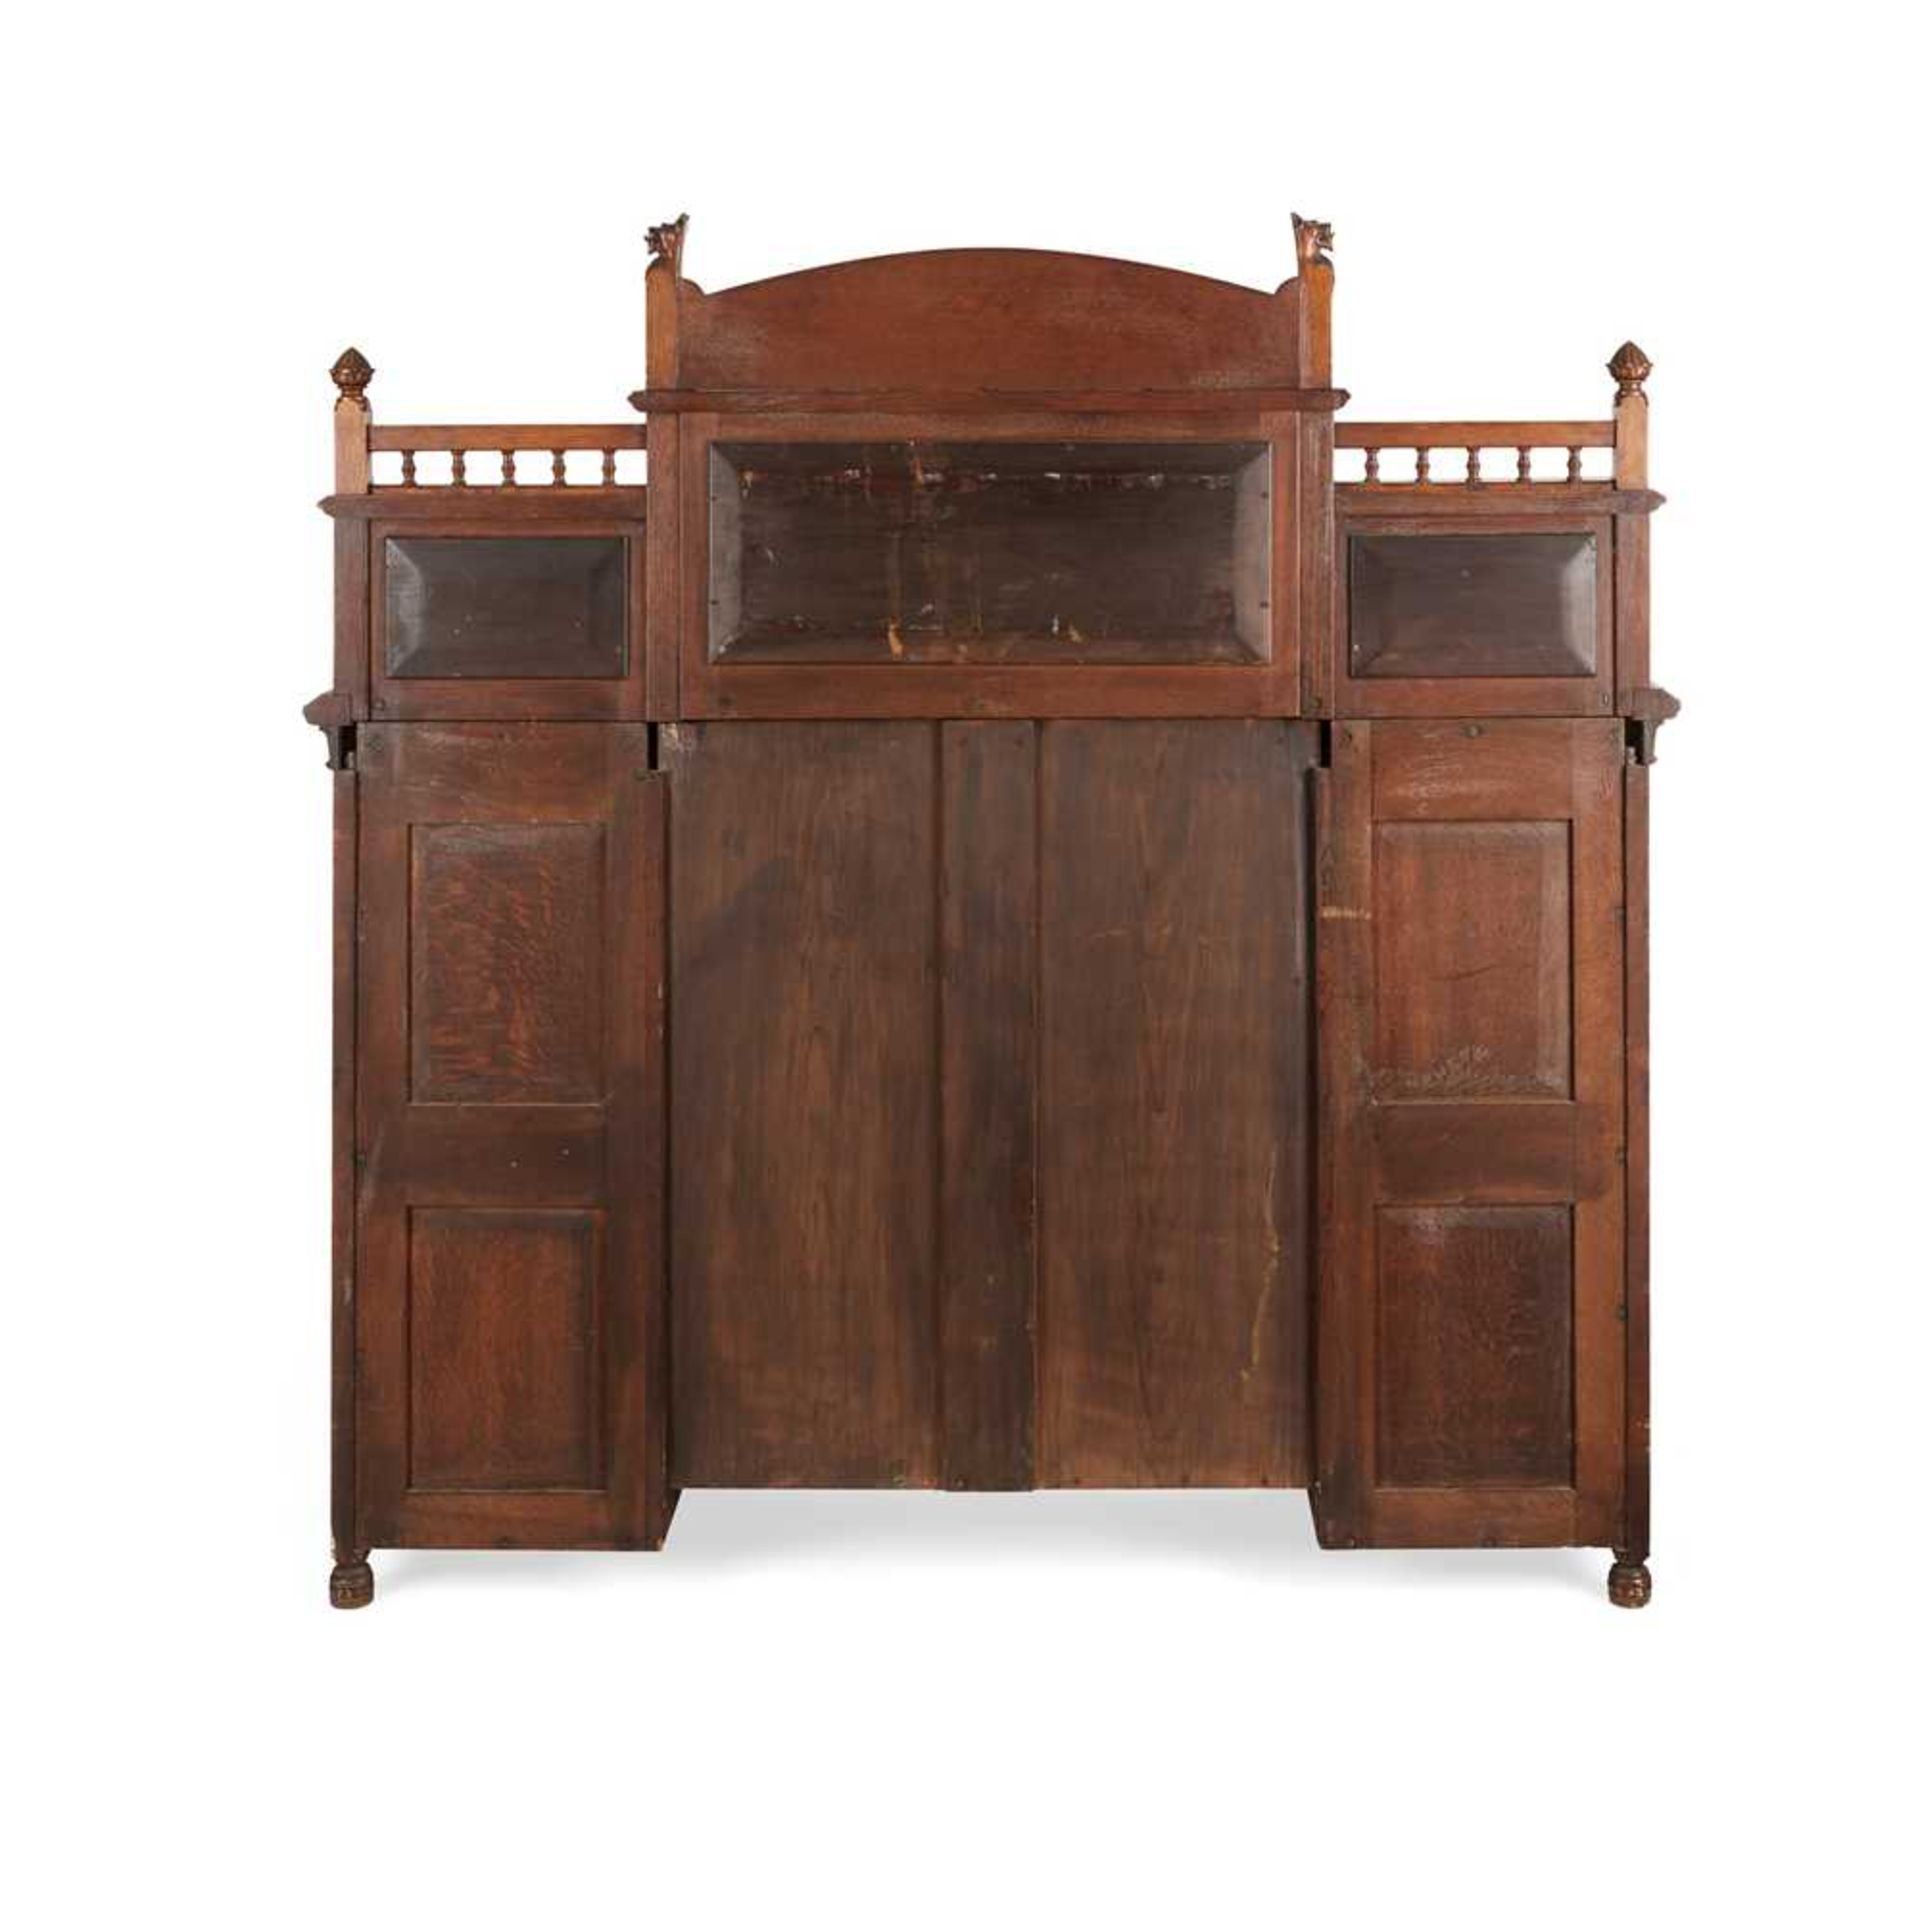 BRUCE TALBERT (1838-1881) (ATTRIBUTED DESIGNER) GOTHIC REVIVAL DRAWING ROOM CABINET, CIRCA 1870 - Image 2 of 2